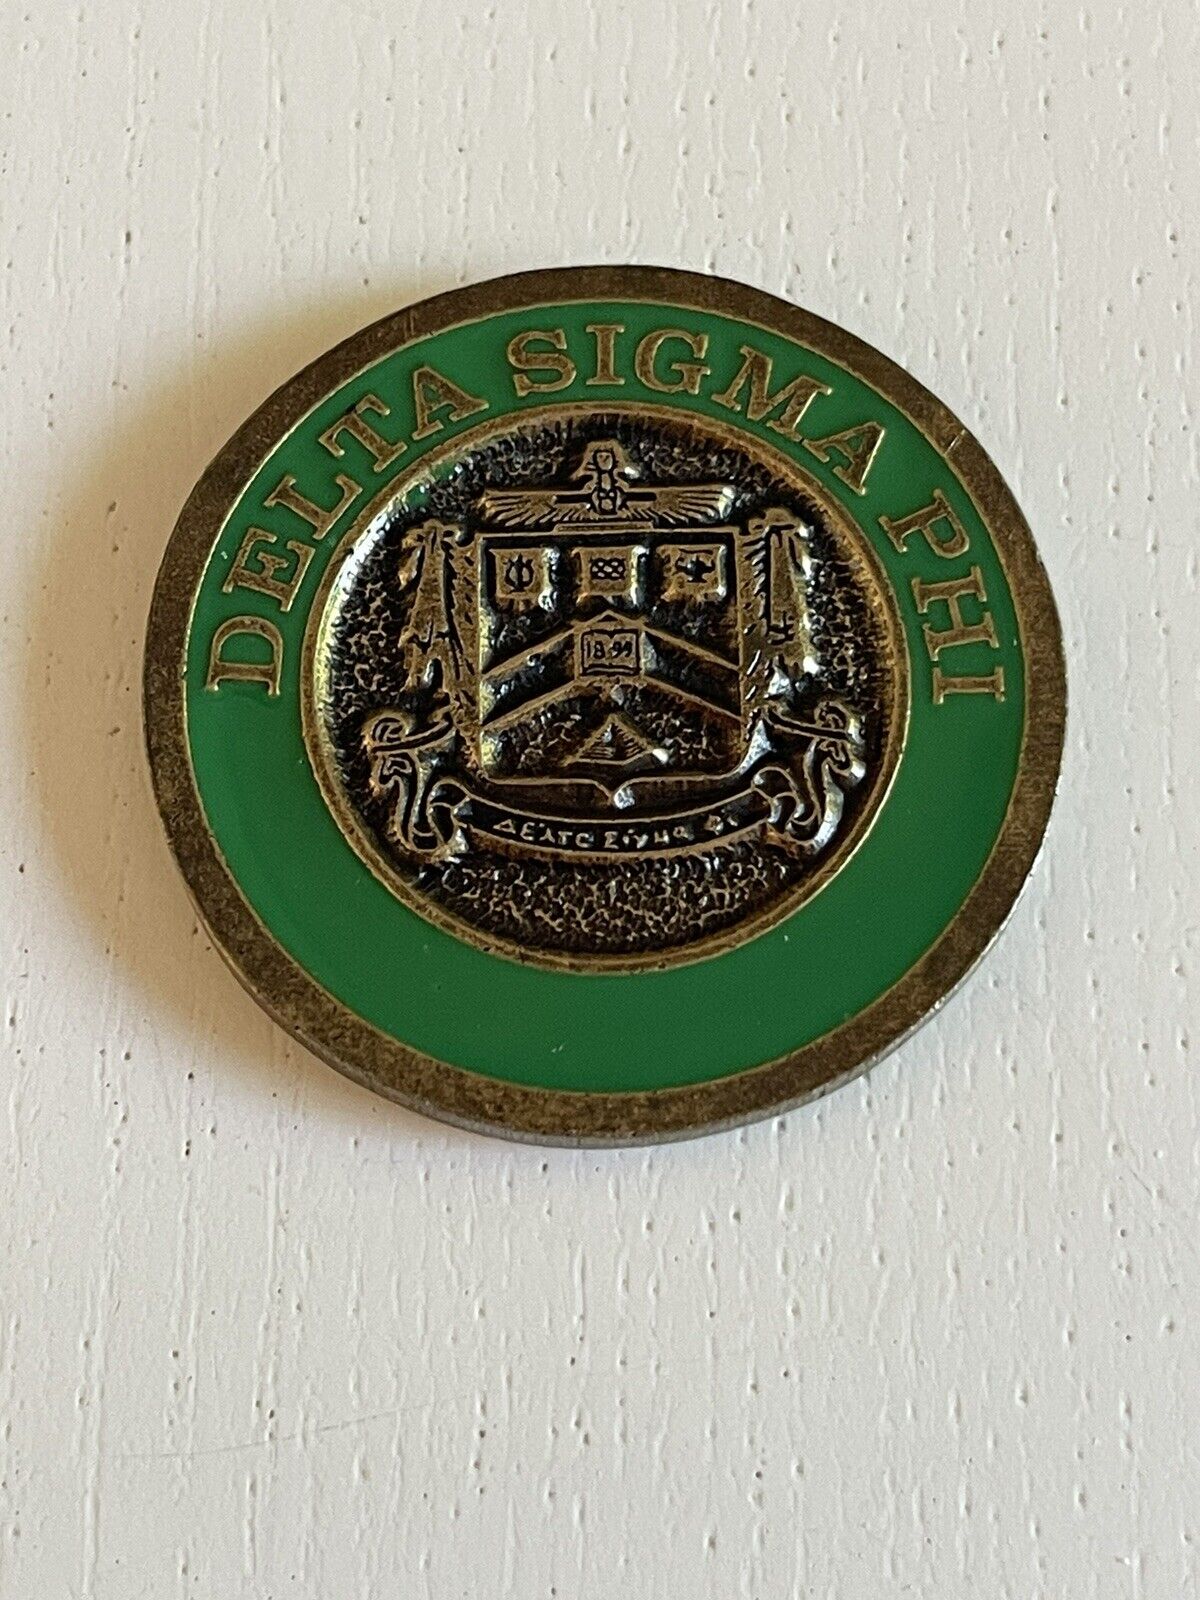 Delta Sigma Phi Coin Fraternity 